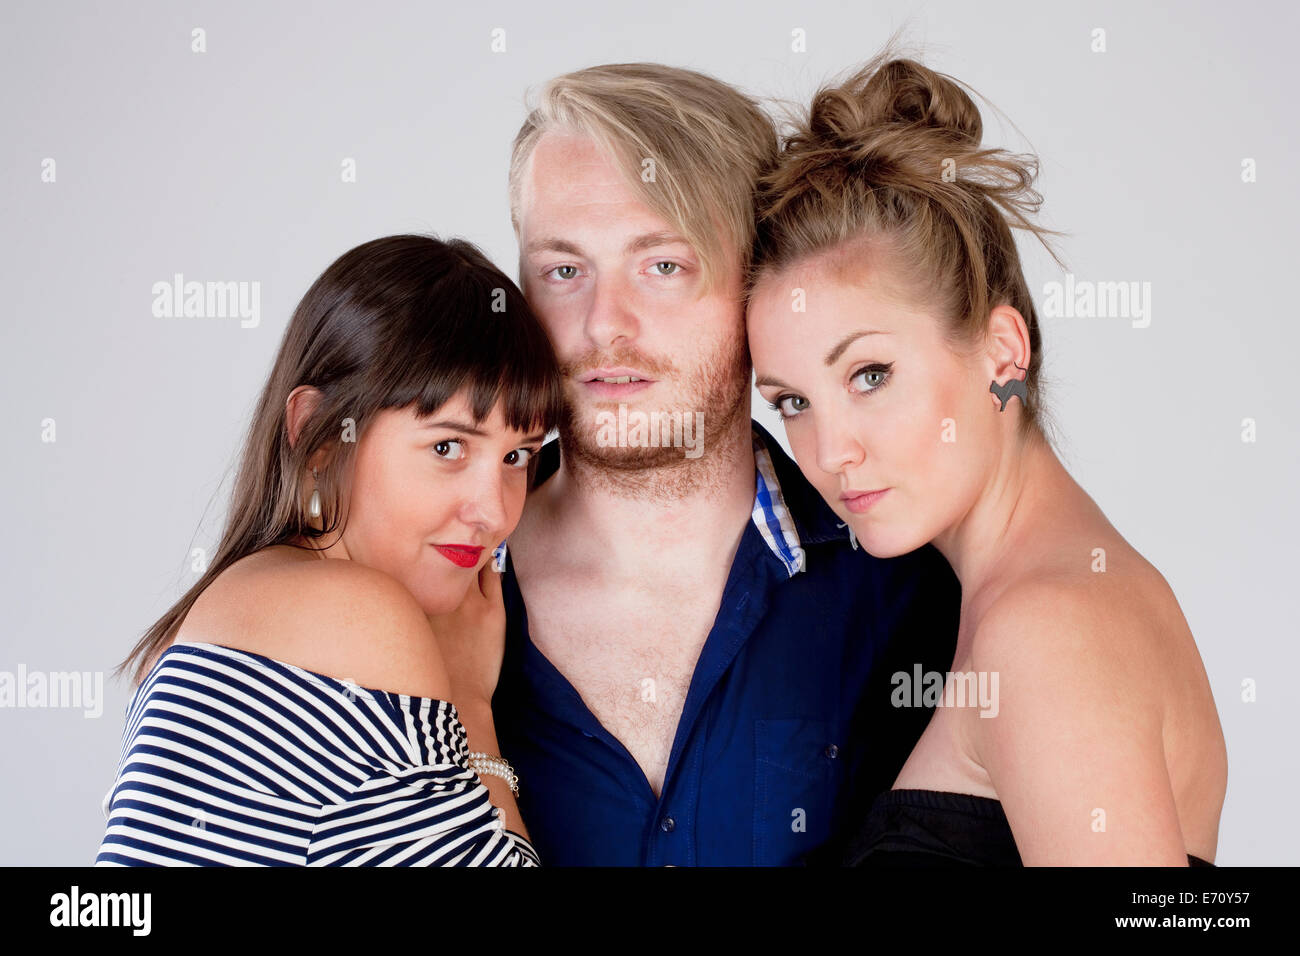 Two Young Female Friends Embracing a Man - Isolated on Gray Stock Photo